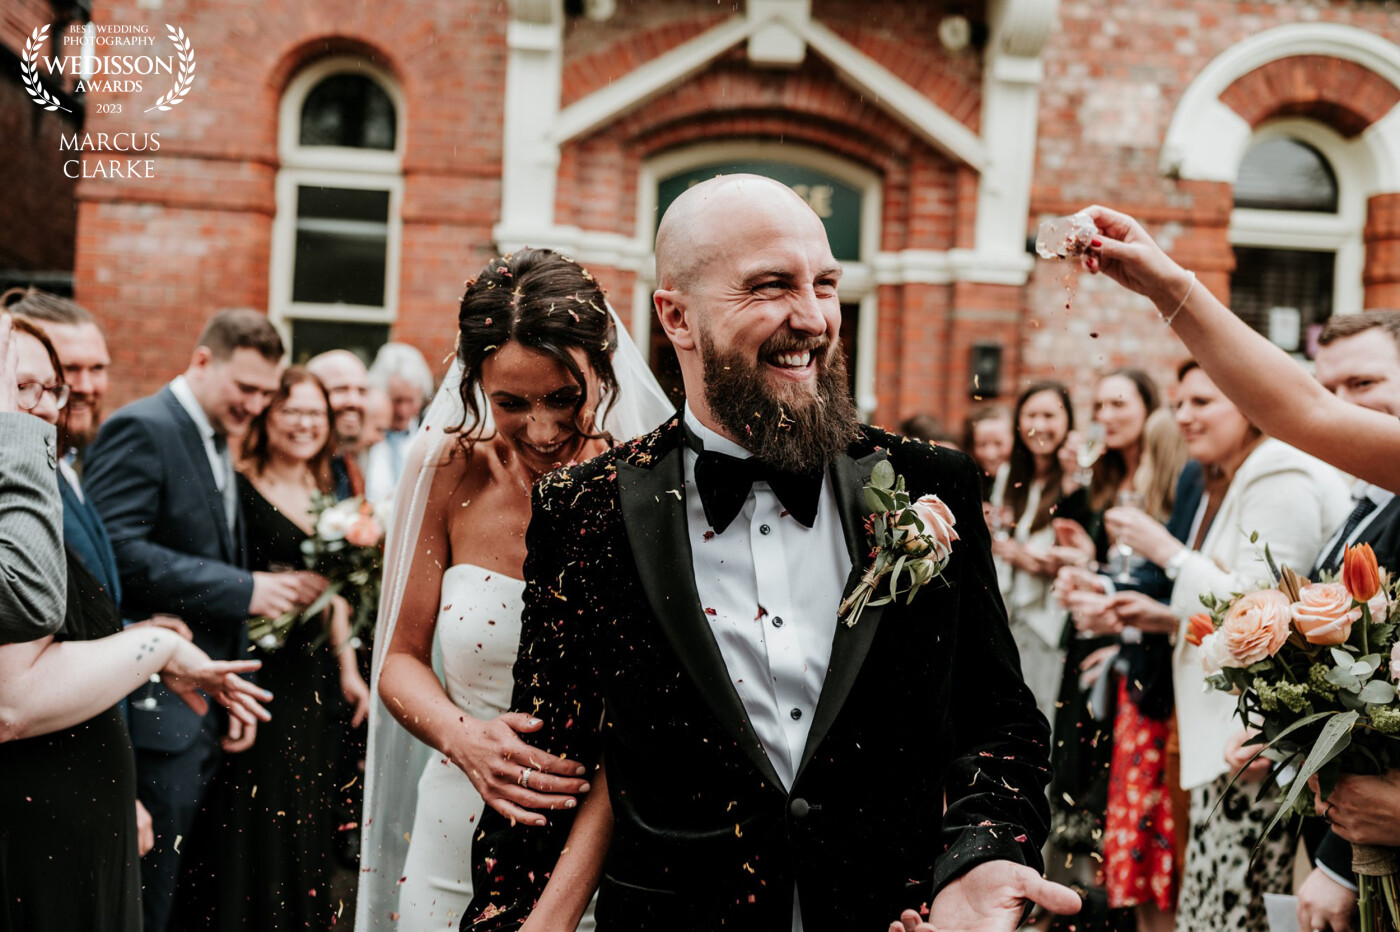 As you can see from this photo, Hannah and Karl were having the time of their lives on their wedding day, full of laughter.